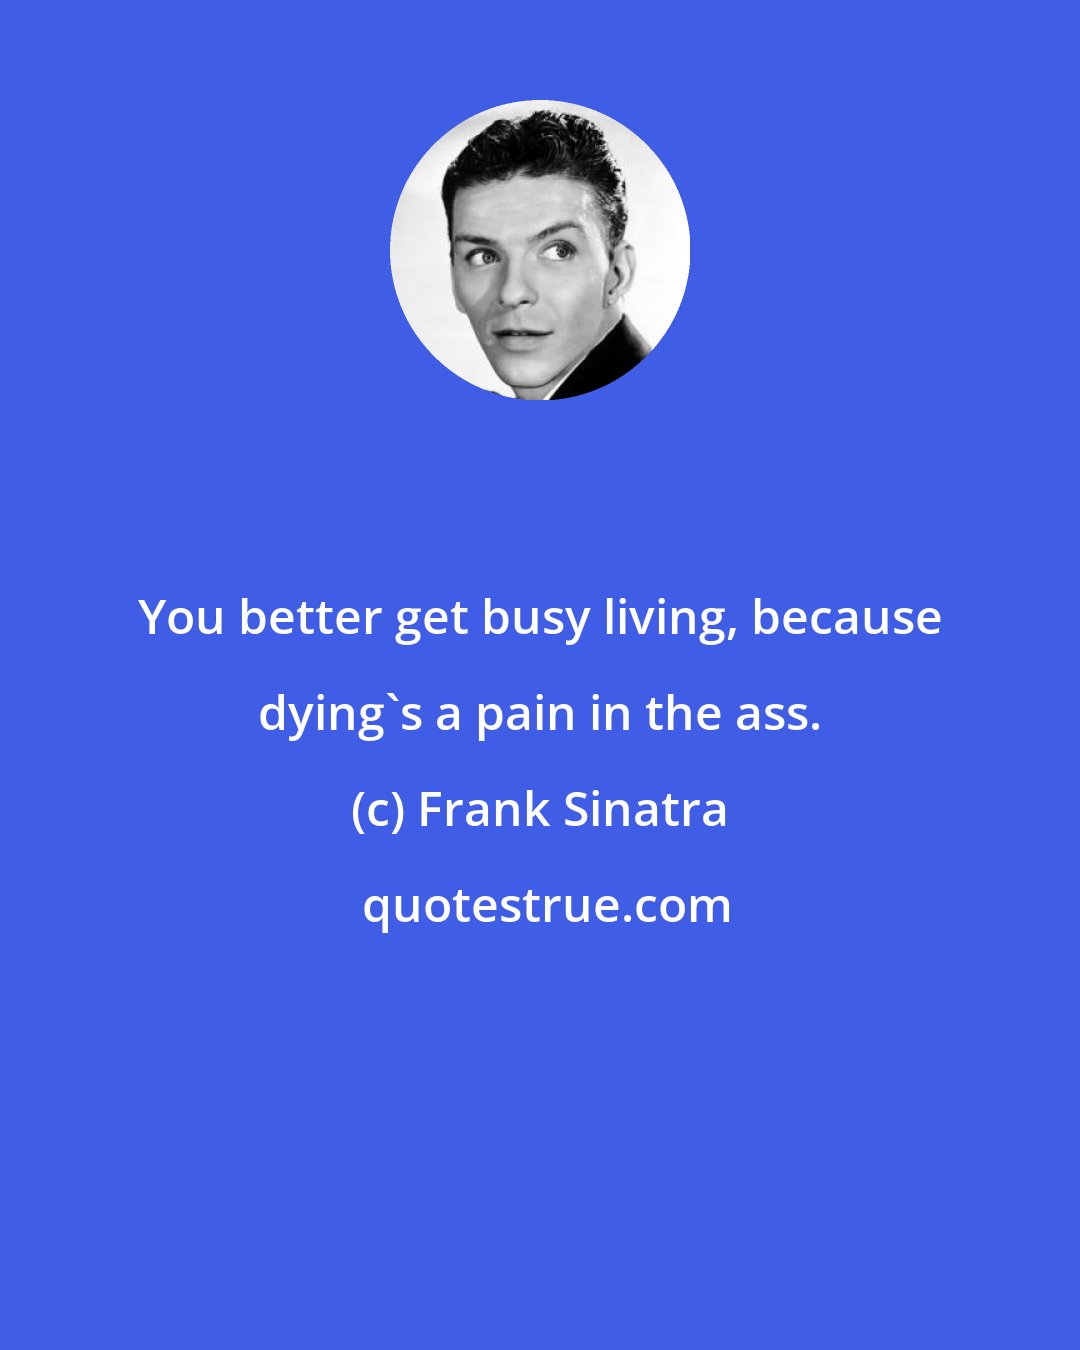 Frank Sinatra: You better get busy living, because dying's a pain in the ass.